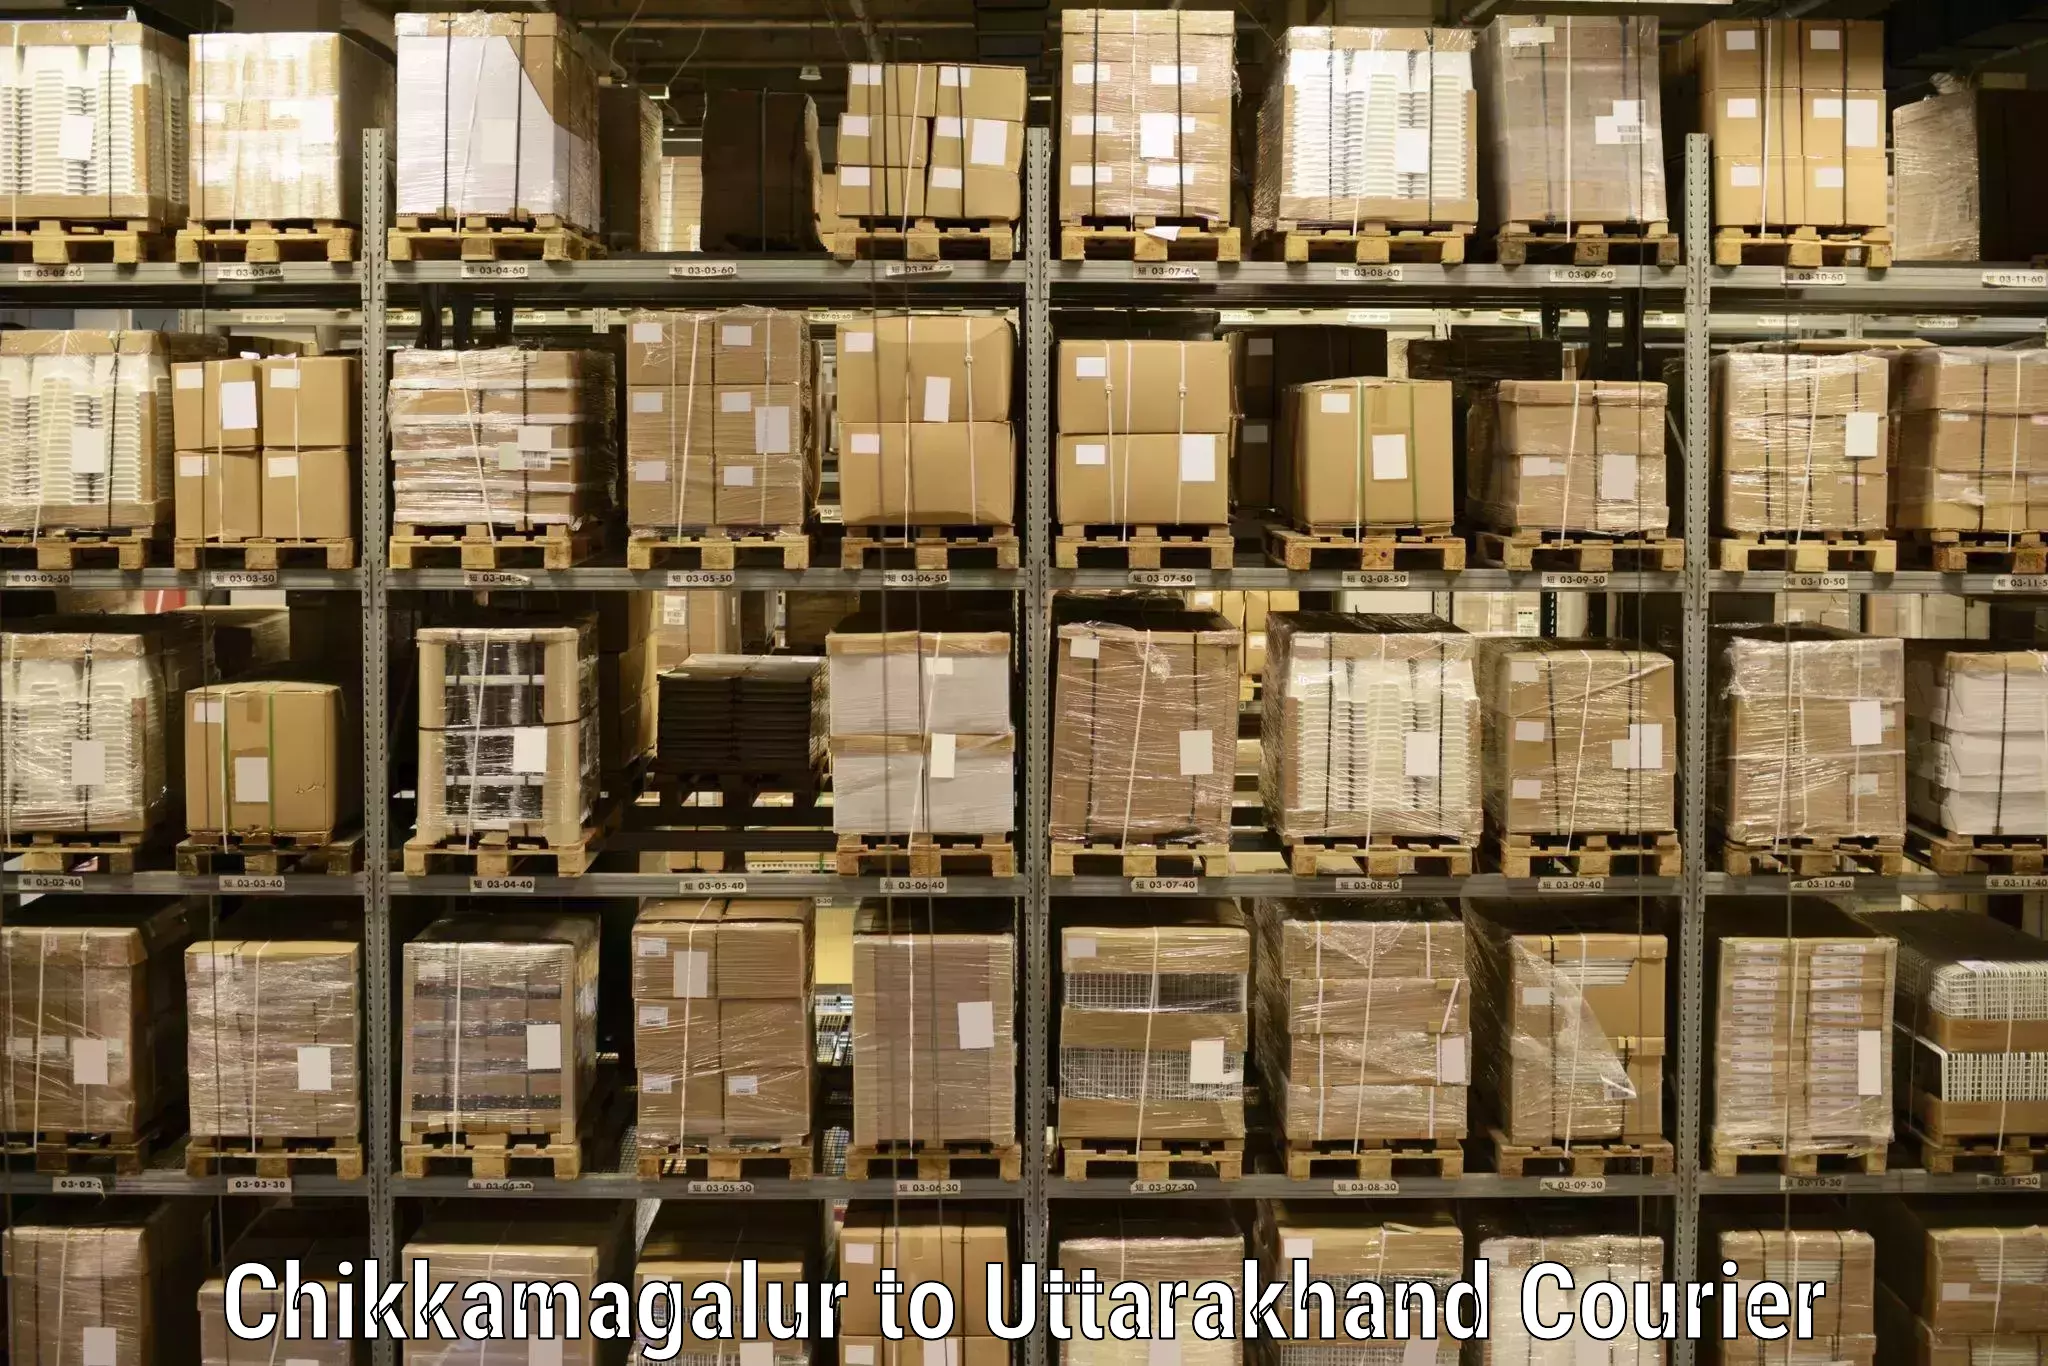 Efficient parcel tracking in Chikkamagalur to Roorkee